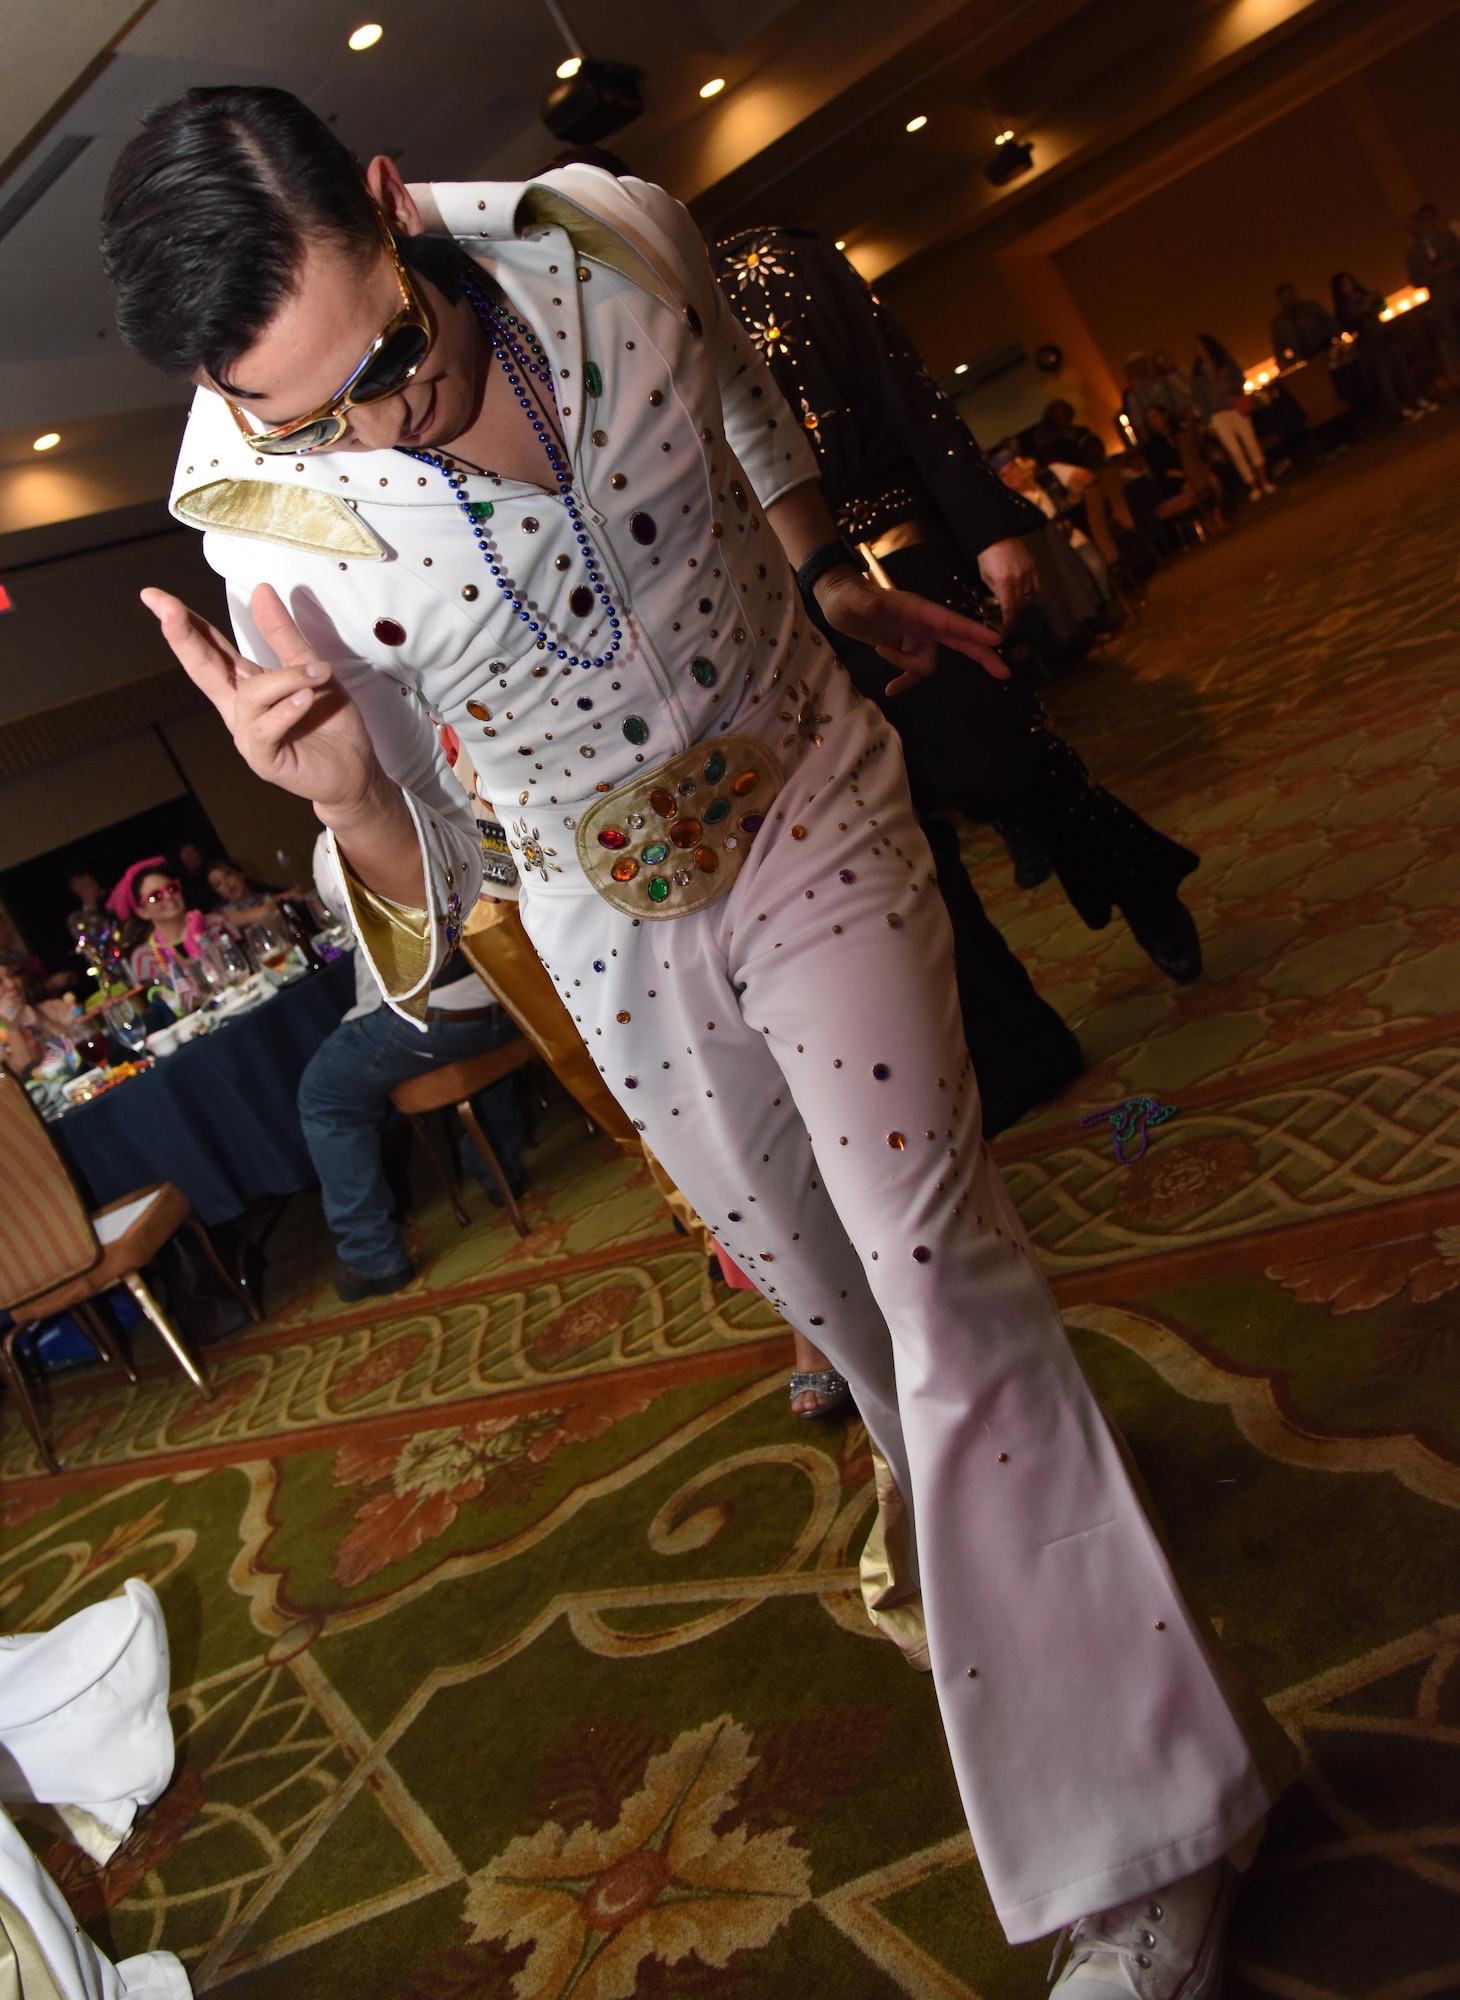 Tech. Sgt. Randal Hernandez, 81st Training Wing command chief executive, portrays Elvis Presley during a costume contest at the 29th Annual Krewe of Medics Mardi Gras Ball at the Bay Breeze Event Center Jan. 28, 2017, on Keesler Air Force Base, Miss. The Krewe of Medics hosts a yearly ball to give Keesler Medical Center personnel a taste of the Gulf Coast and an opportunity to experience a traditional Mardi Gras. The theme for this year's ball was Blast From The Past. (U.S. Air Force photo by Kemberly Groue)